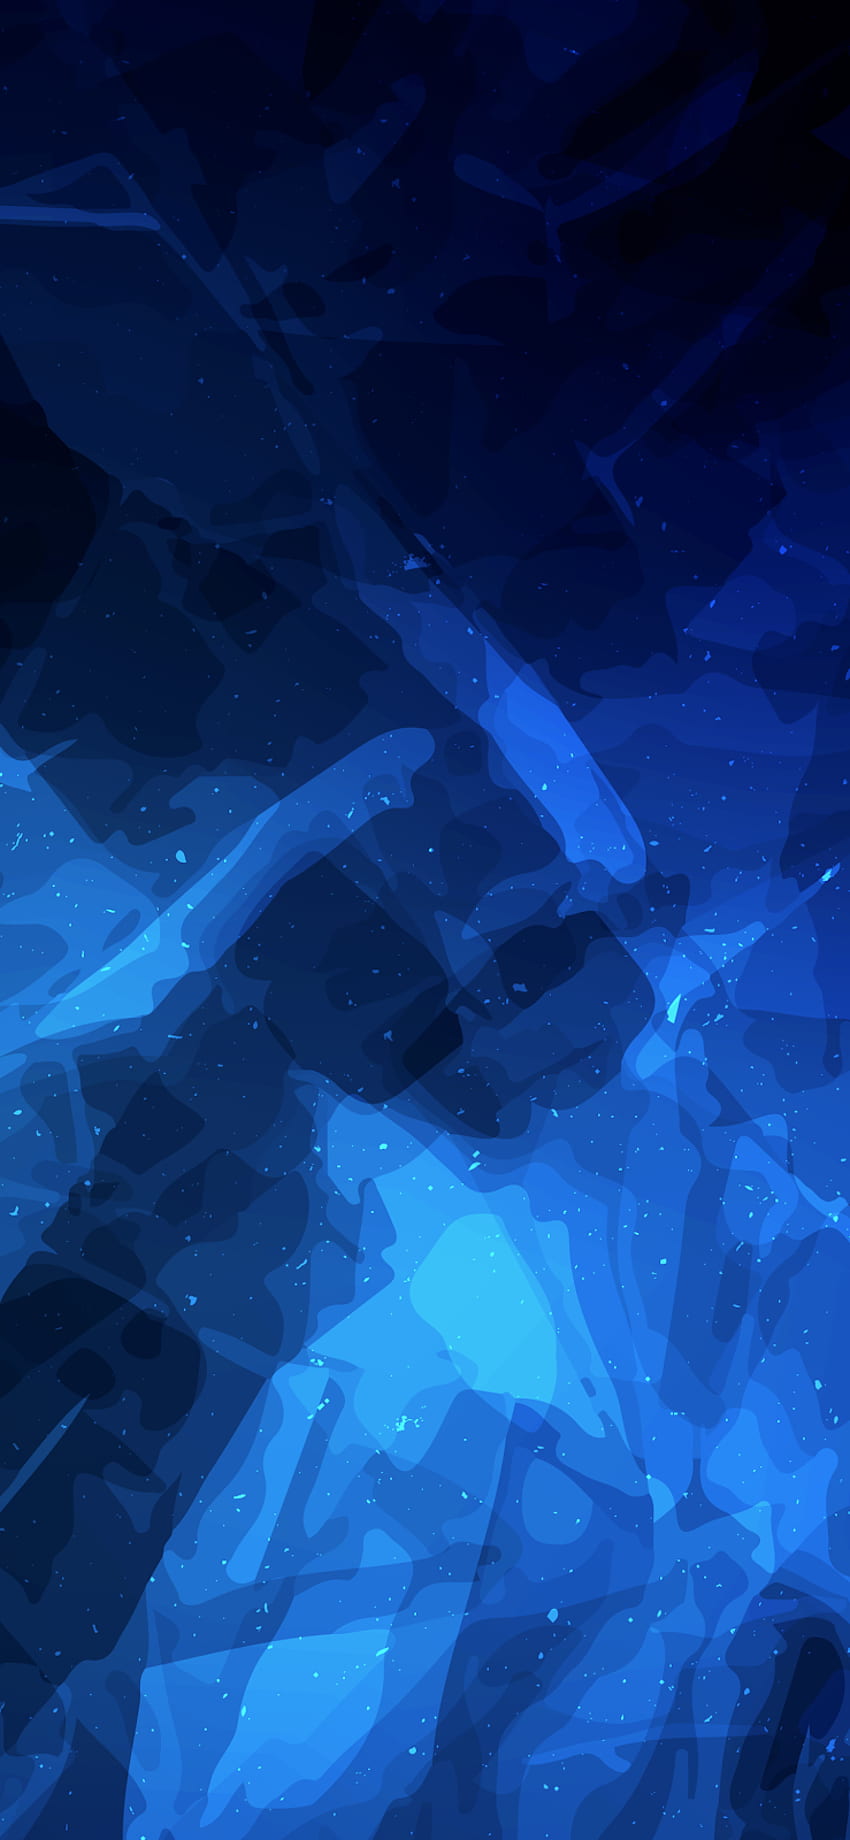 iphone 5 wallpaper abstract blue